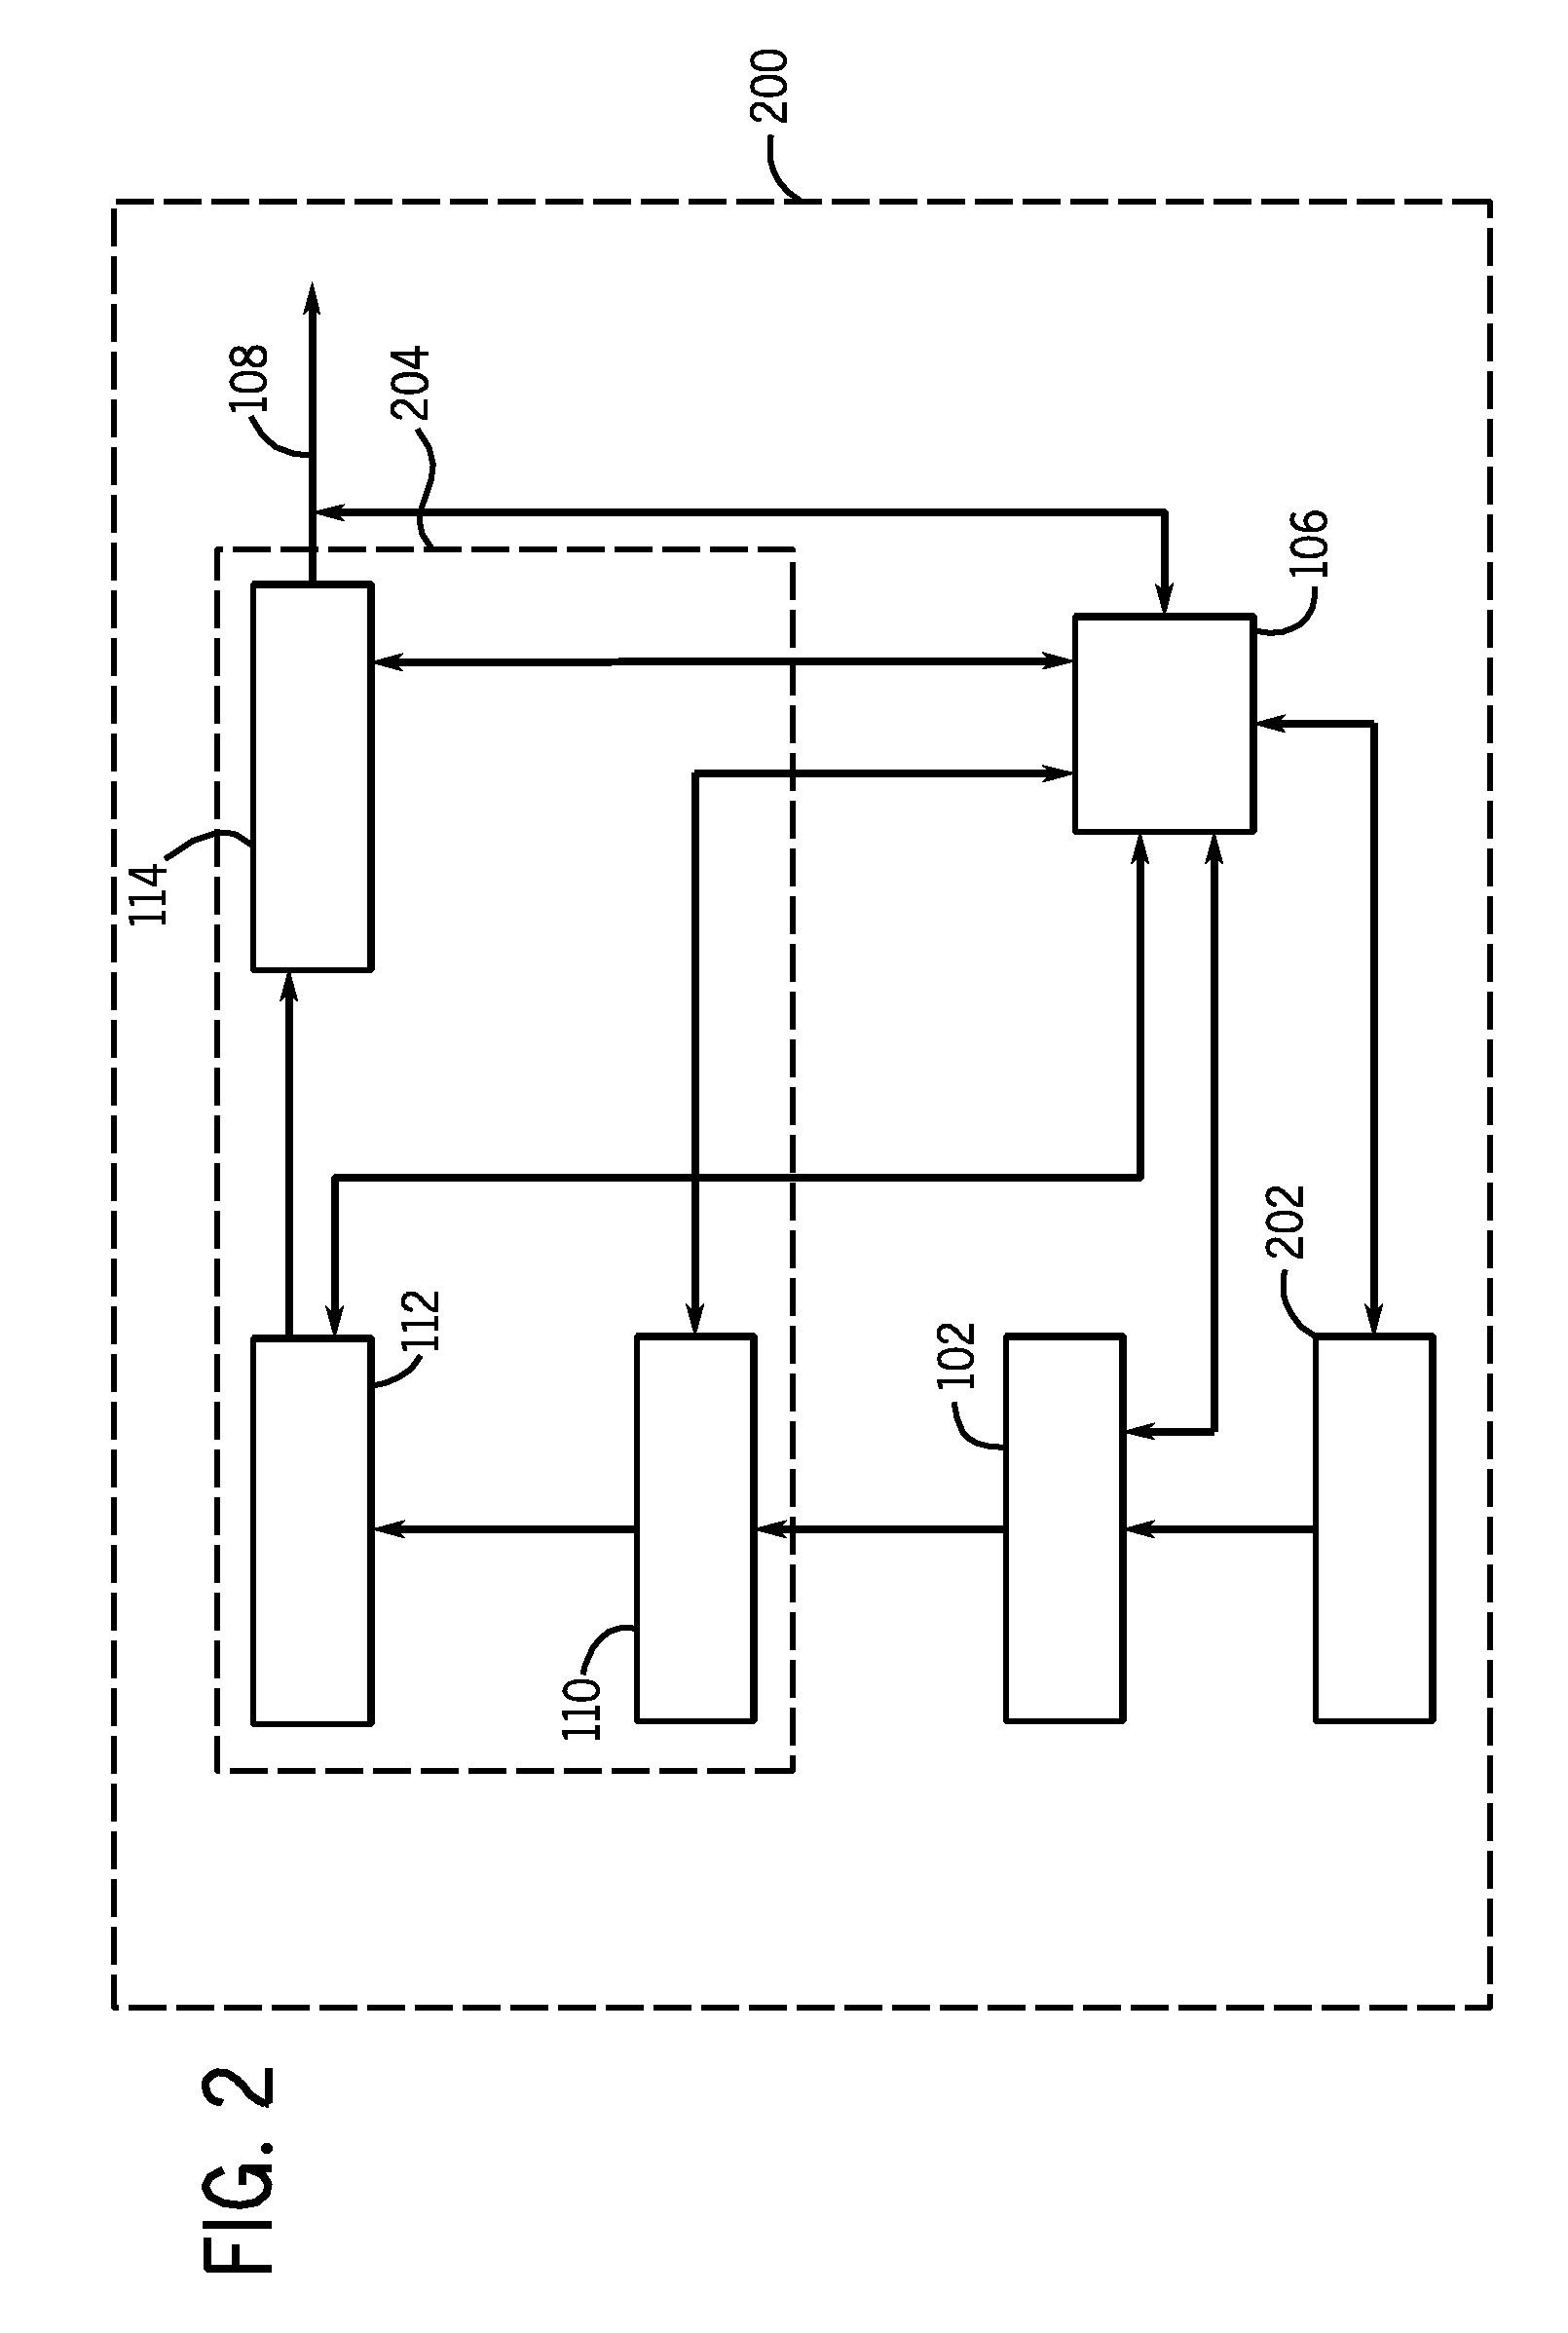 Method and apparatus for welding with battery power